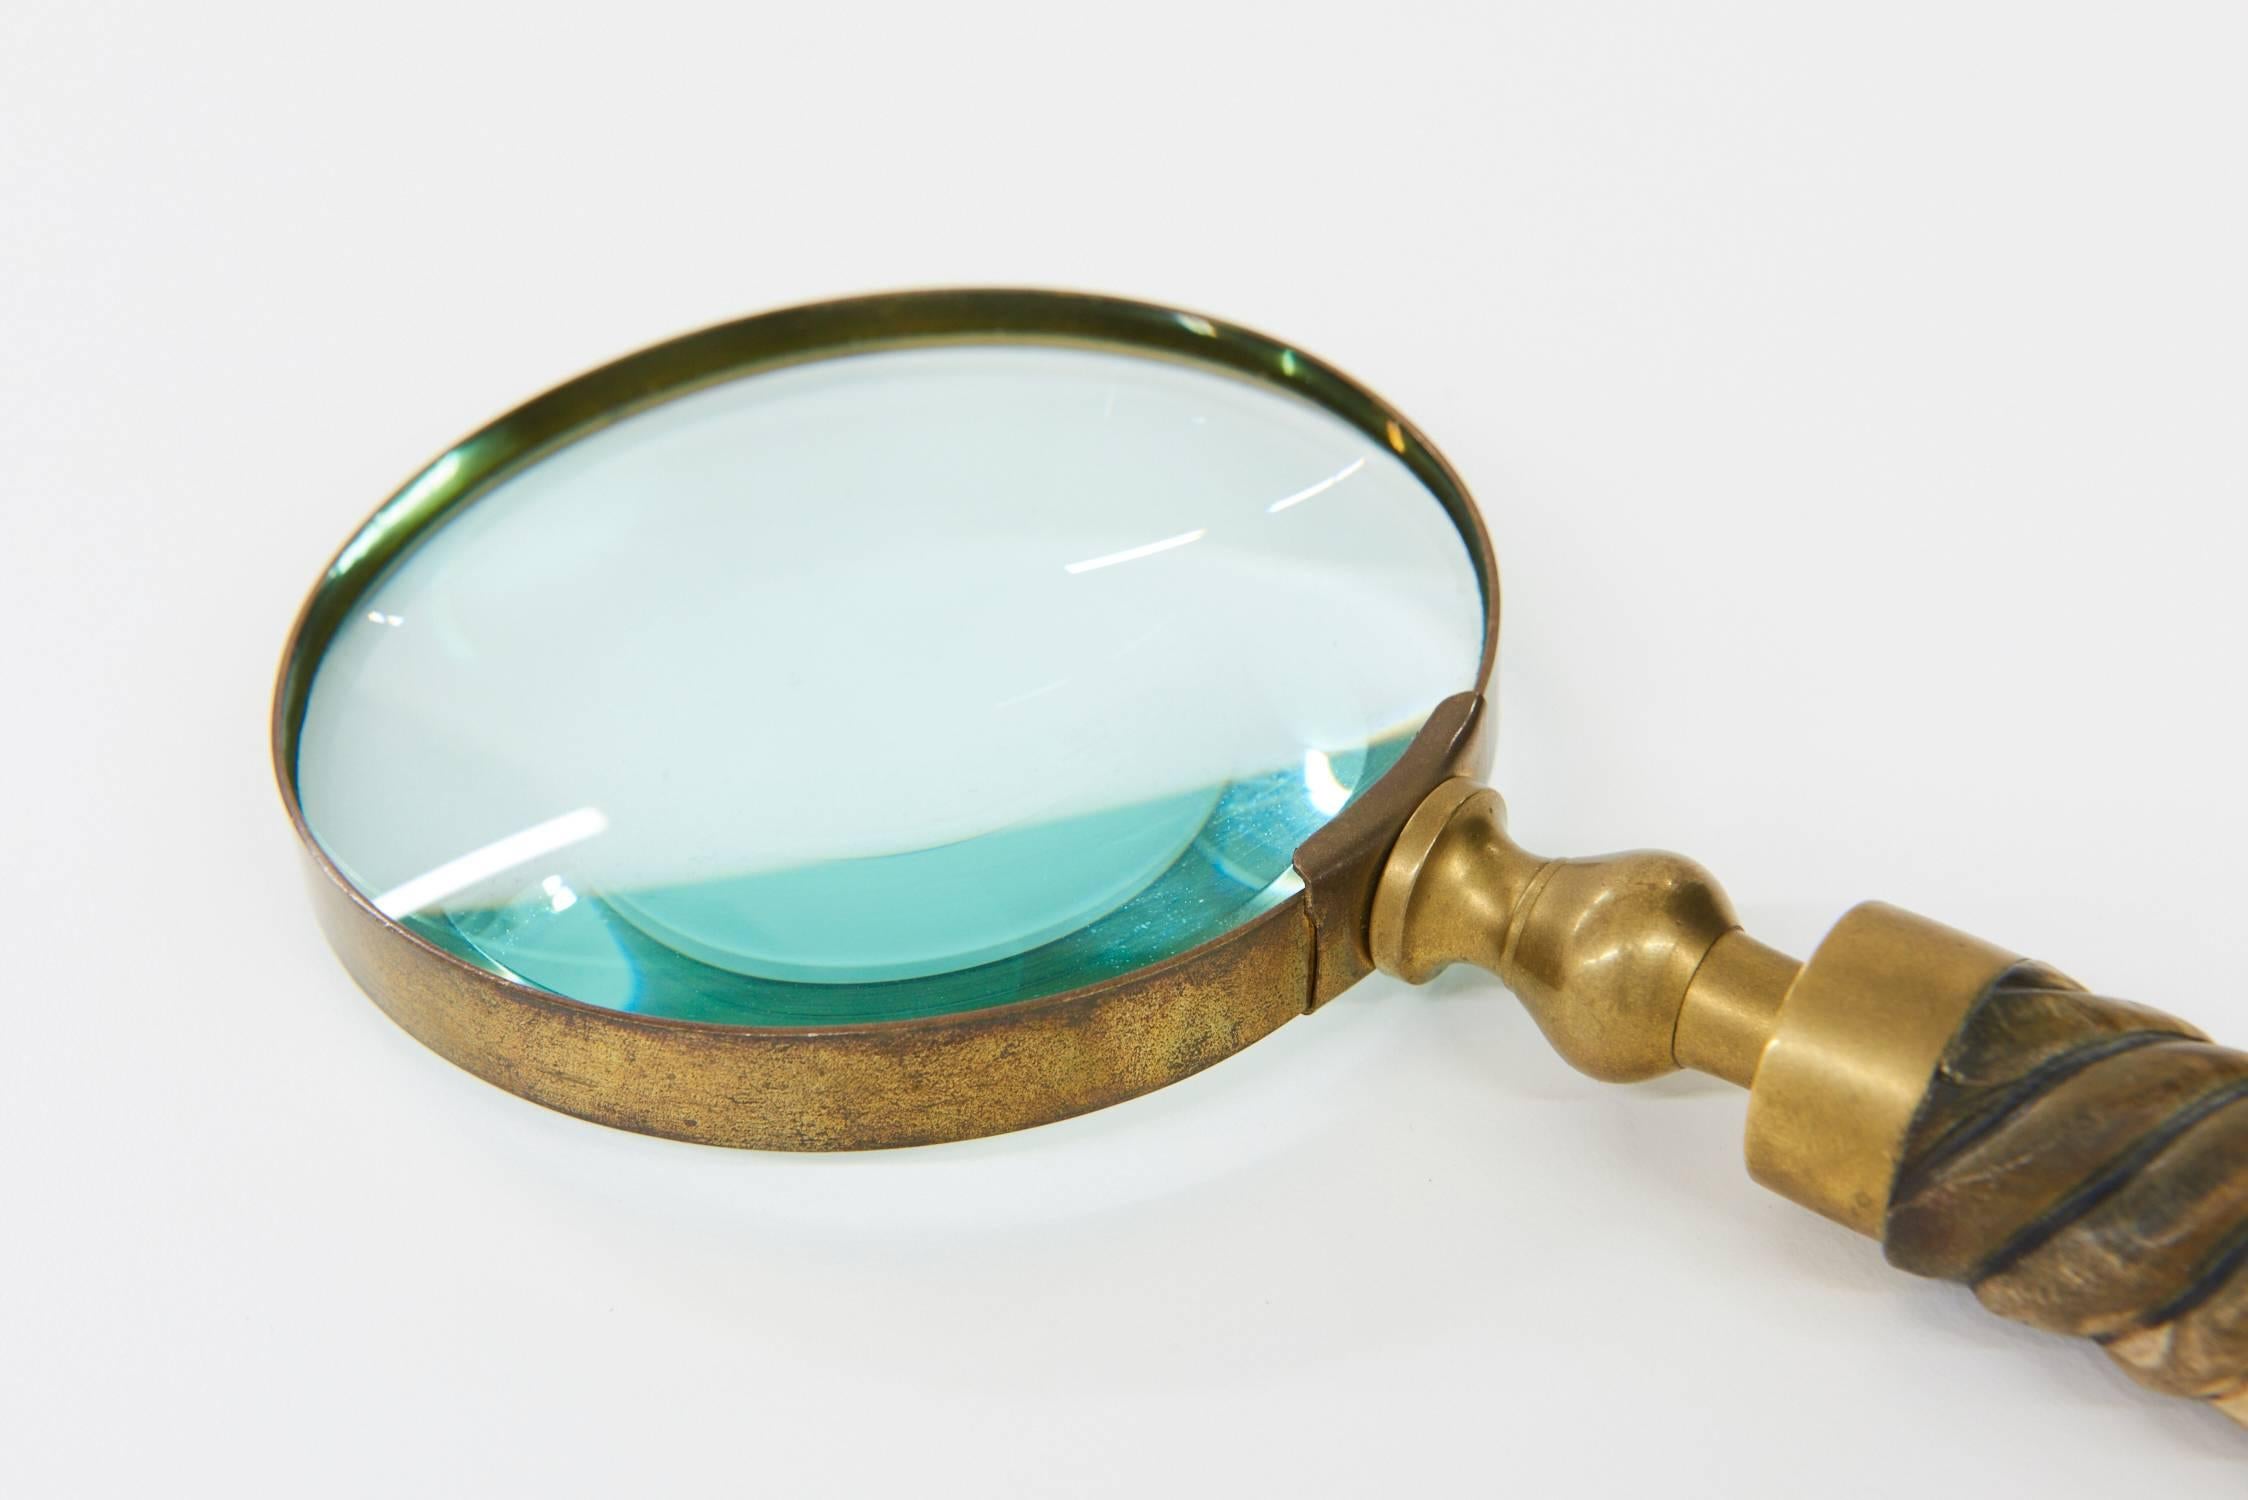 Decorative and useful vintage magnifying glass. The brass fitting has nice patina. Actual glass is in great condition - no cracks or chips. Delicate hand-carved wooden handle has slight curve and nice wear and patina.